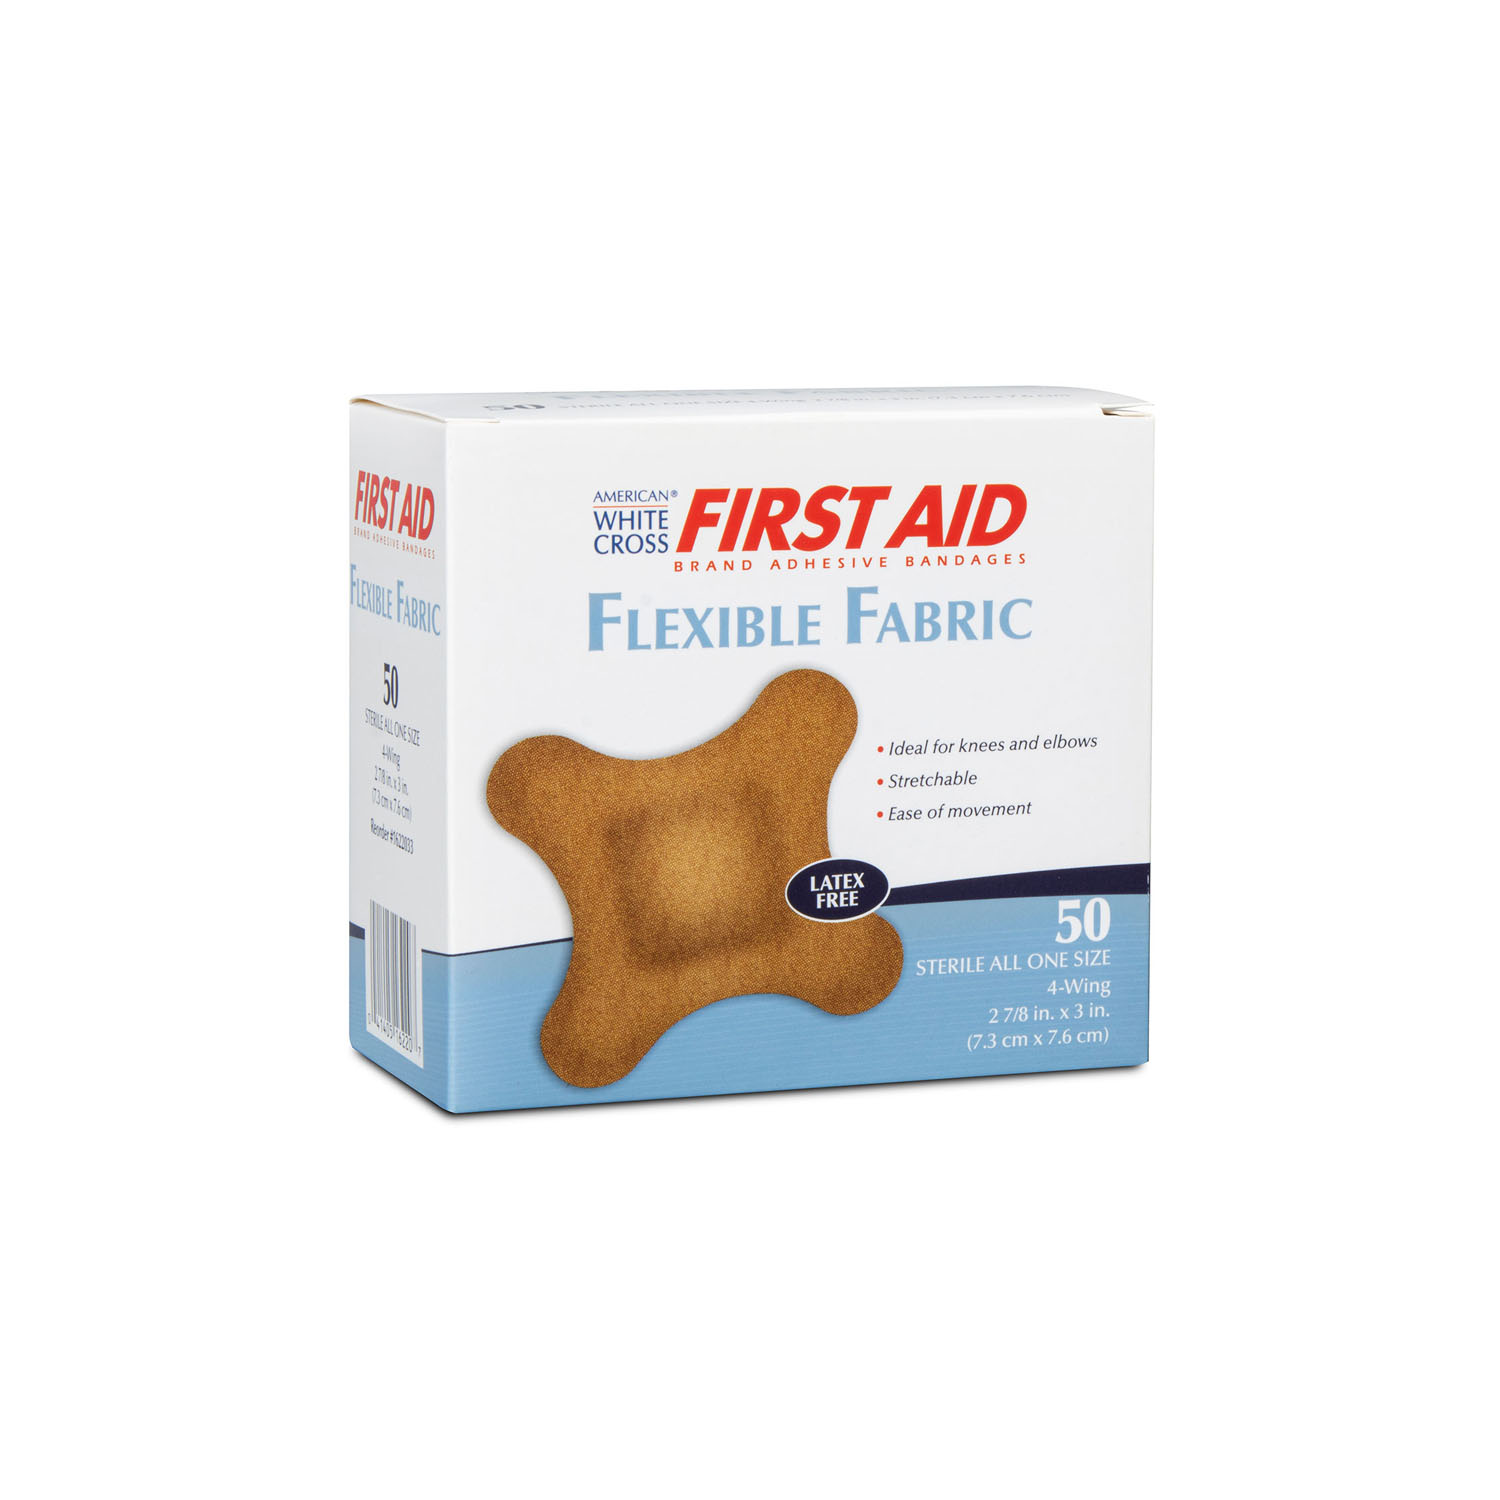 DUKAL FIRST AID FLEXIBLE ADHESIVE BANDAGES : 1622033 BX $14.09 Stocked